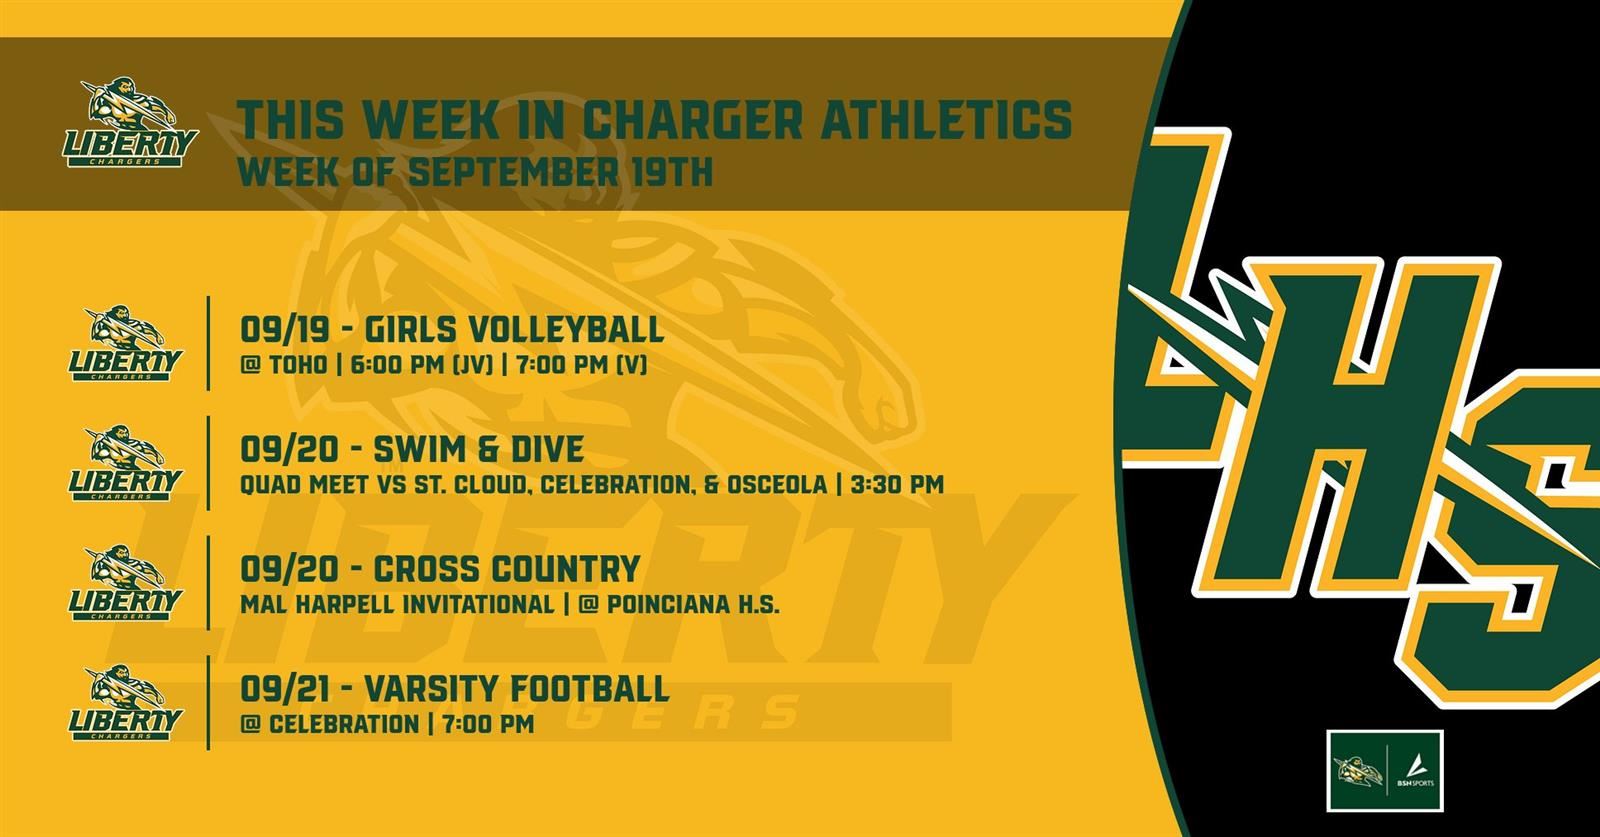 This Week In Charger Athletics